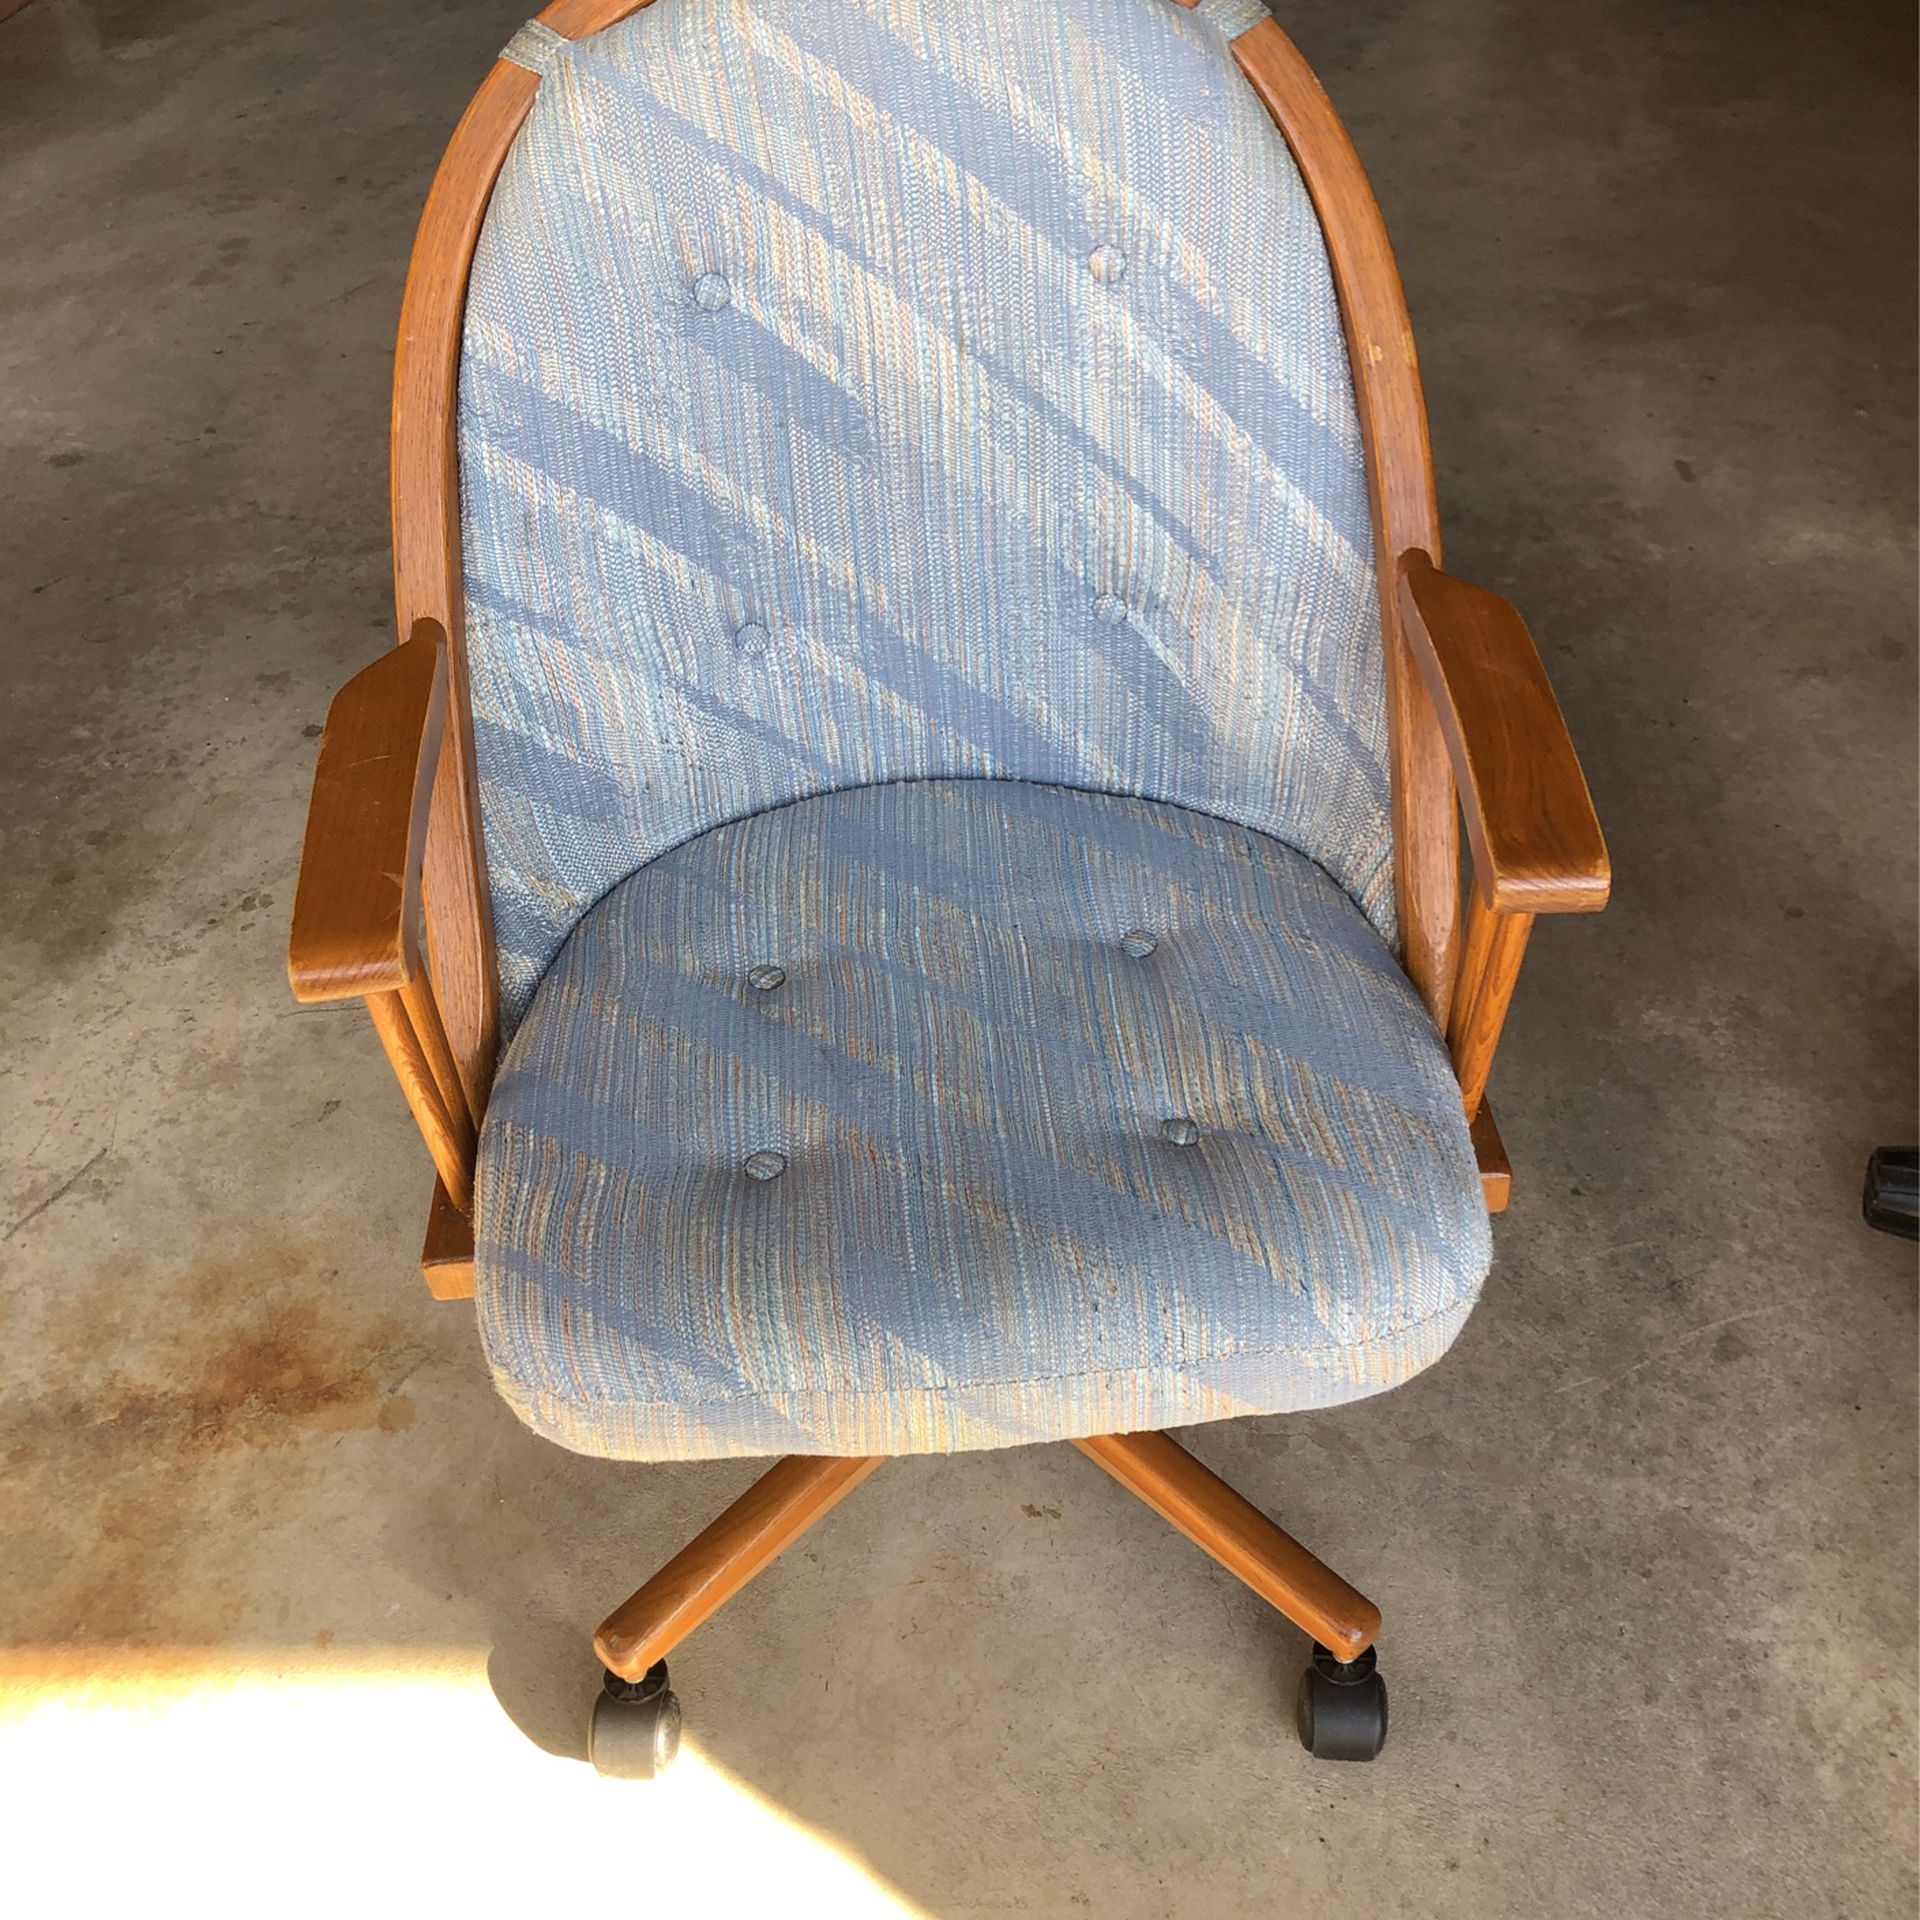 Swivel Chair On Rollers Cloth Is Clean No Tears Or Stains  Nice Chair 